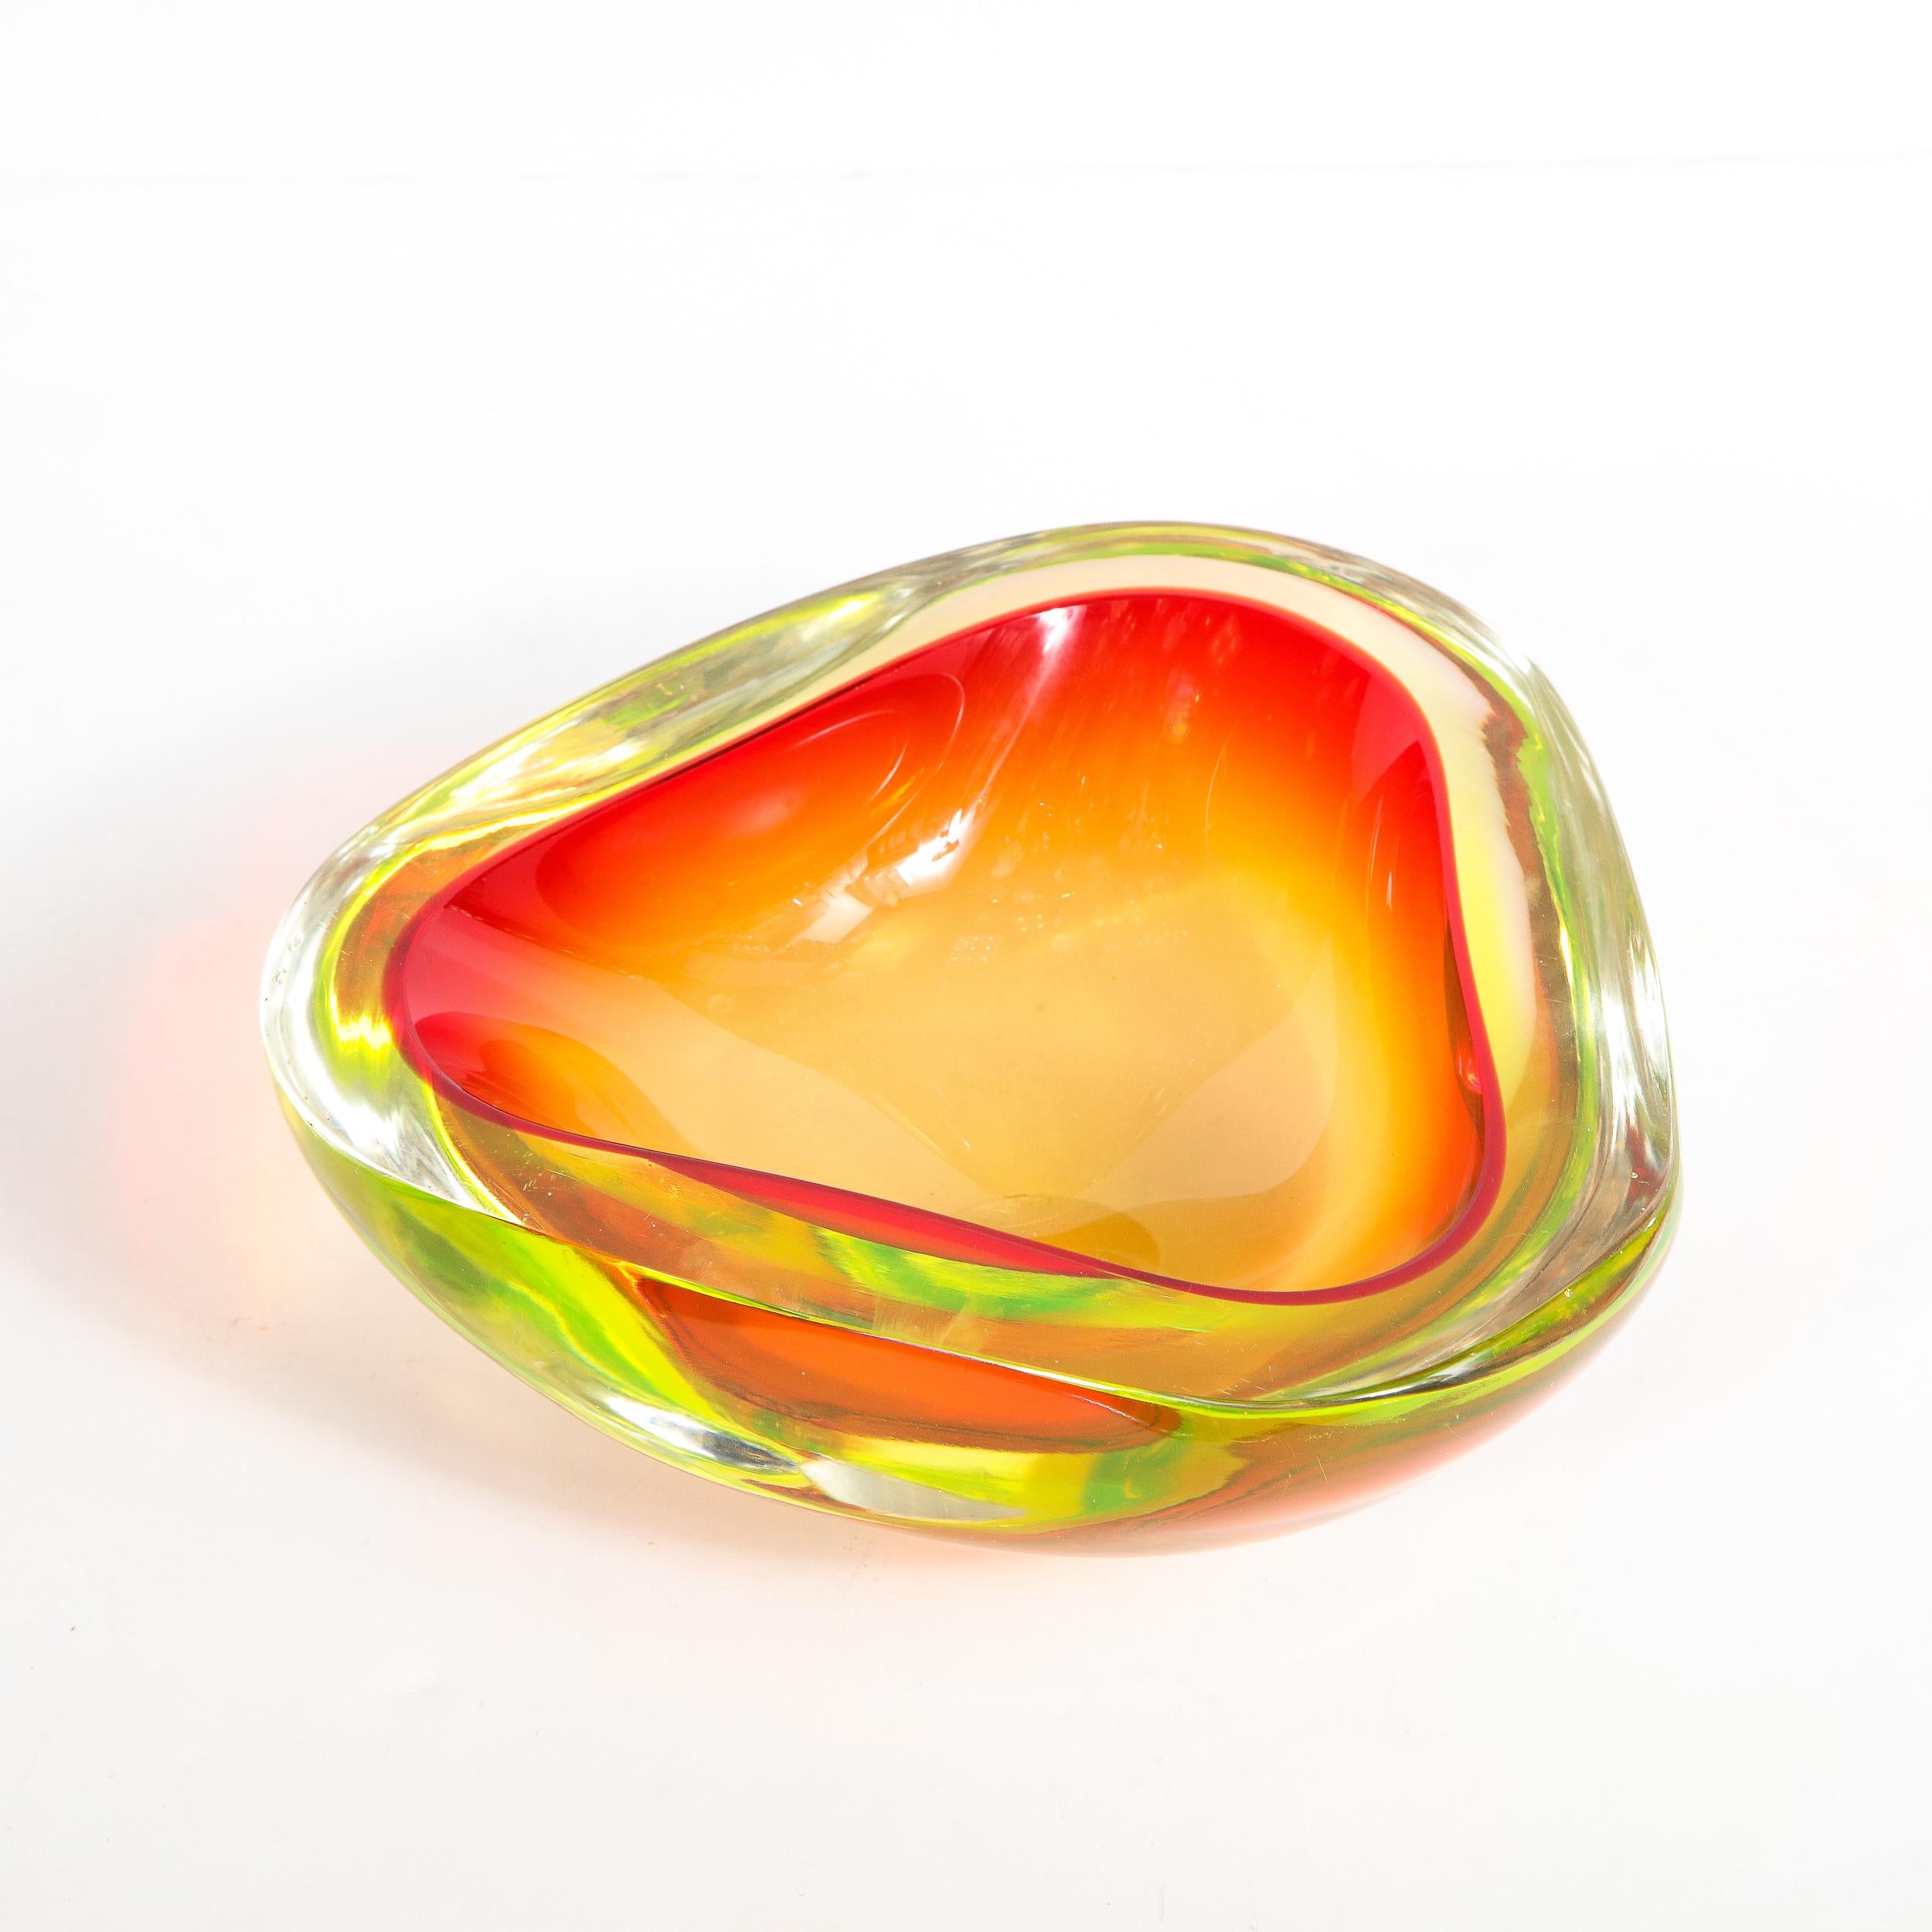 This elegant Mid-Century Modern glass vase bowl realized in Murano, Italy- the island off the coast of Venice renowned for centuries for its superlative glass production- circa 1950. It features a three sided form with rounded corners. The interior